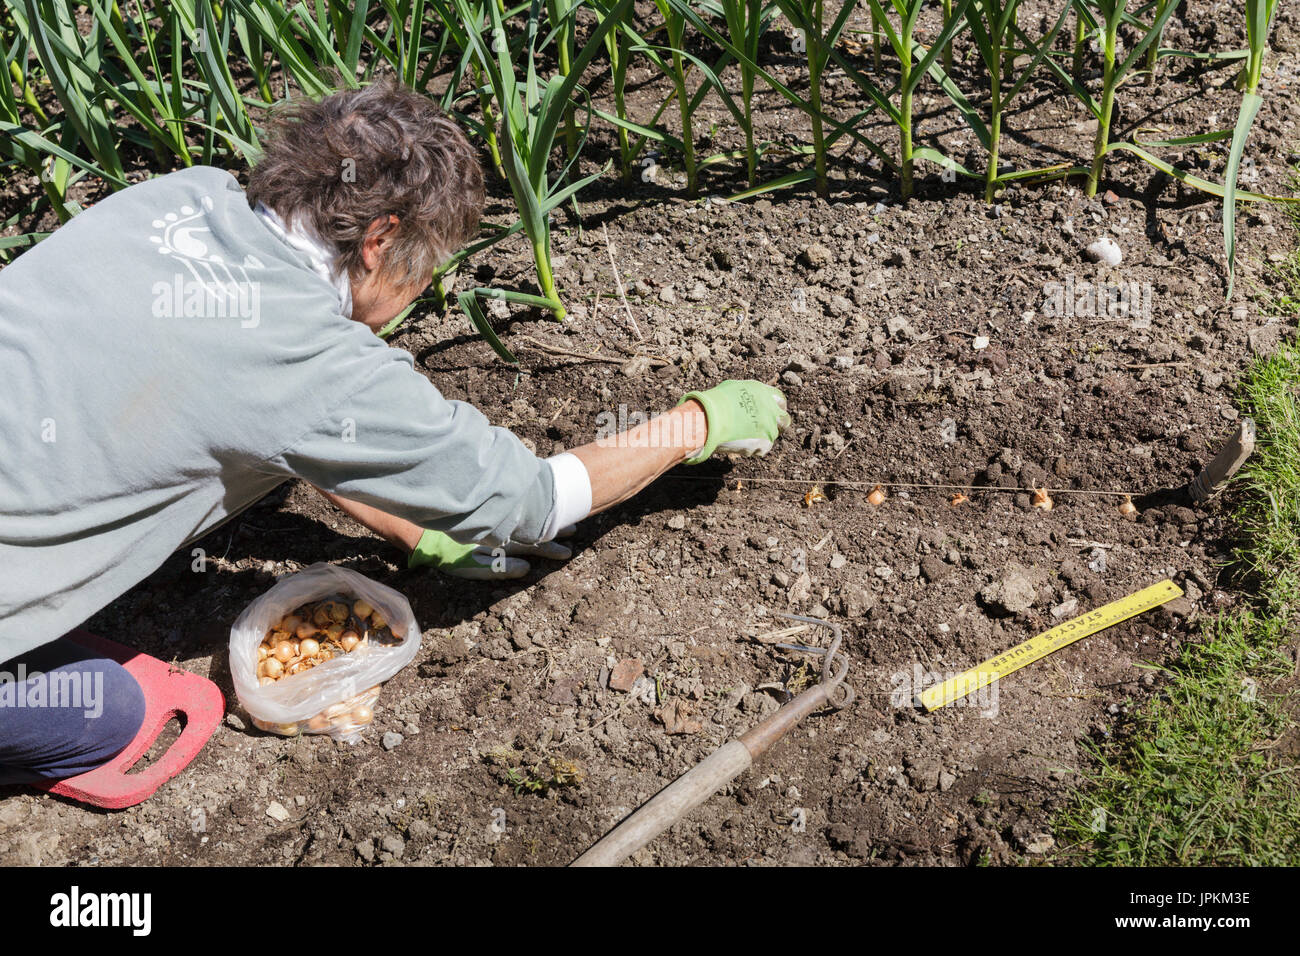 Mohawk Valley, New York state - Woman planting onion sets in her home garden. Stock Photo